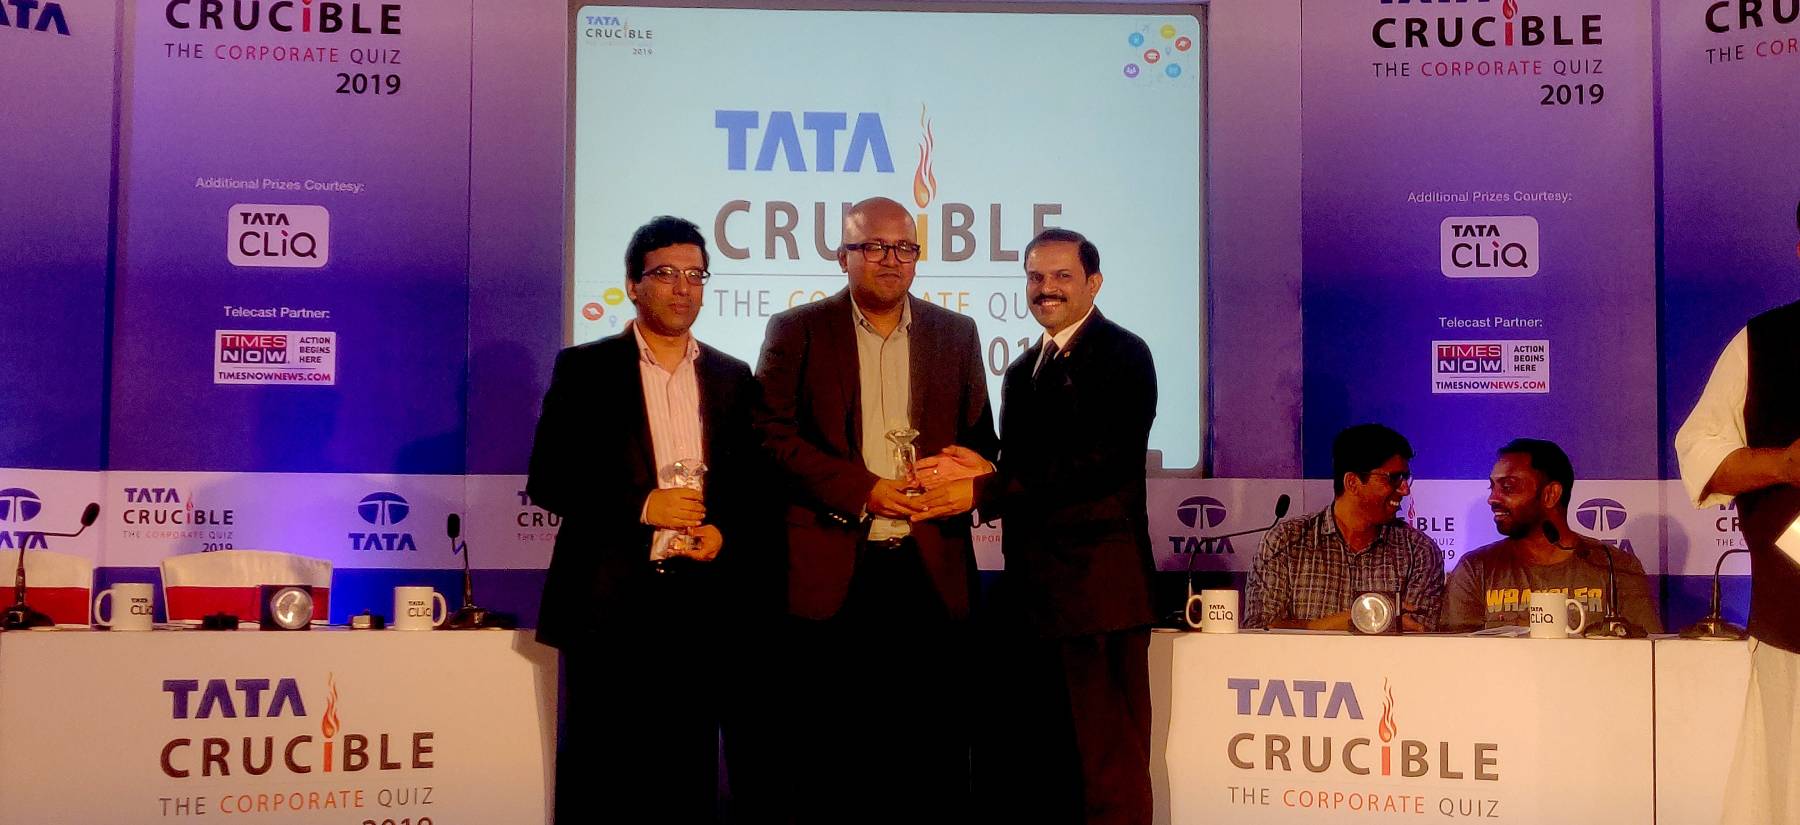 Tata Crucible Corporate Quiz Results For Runners - TCS 